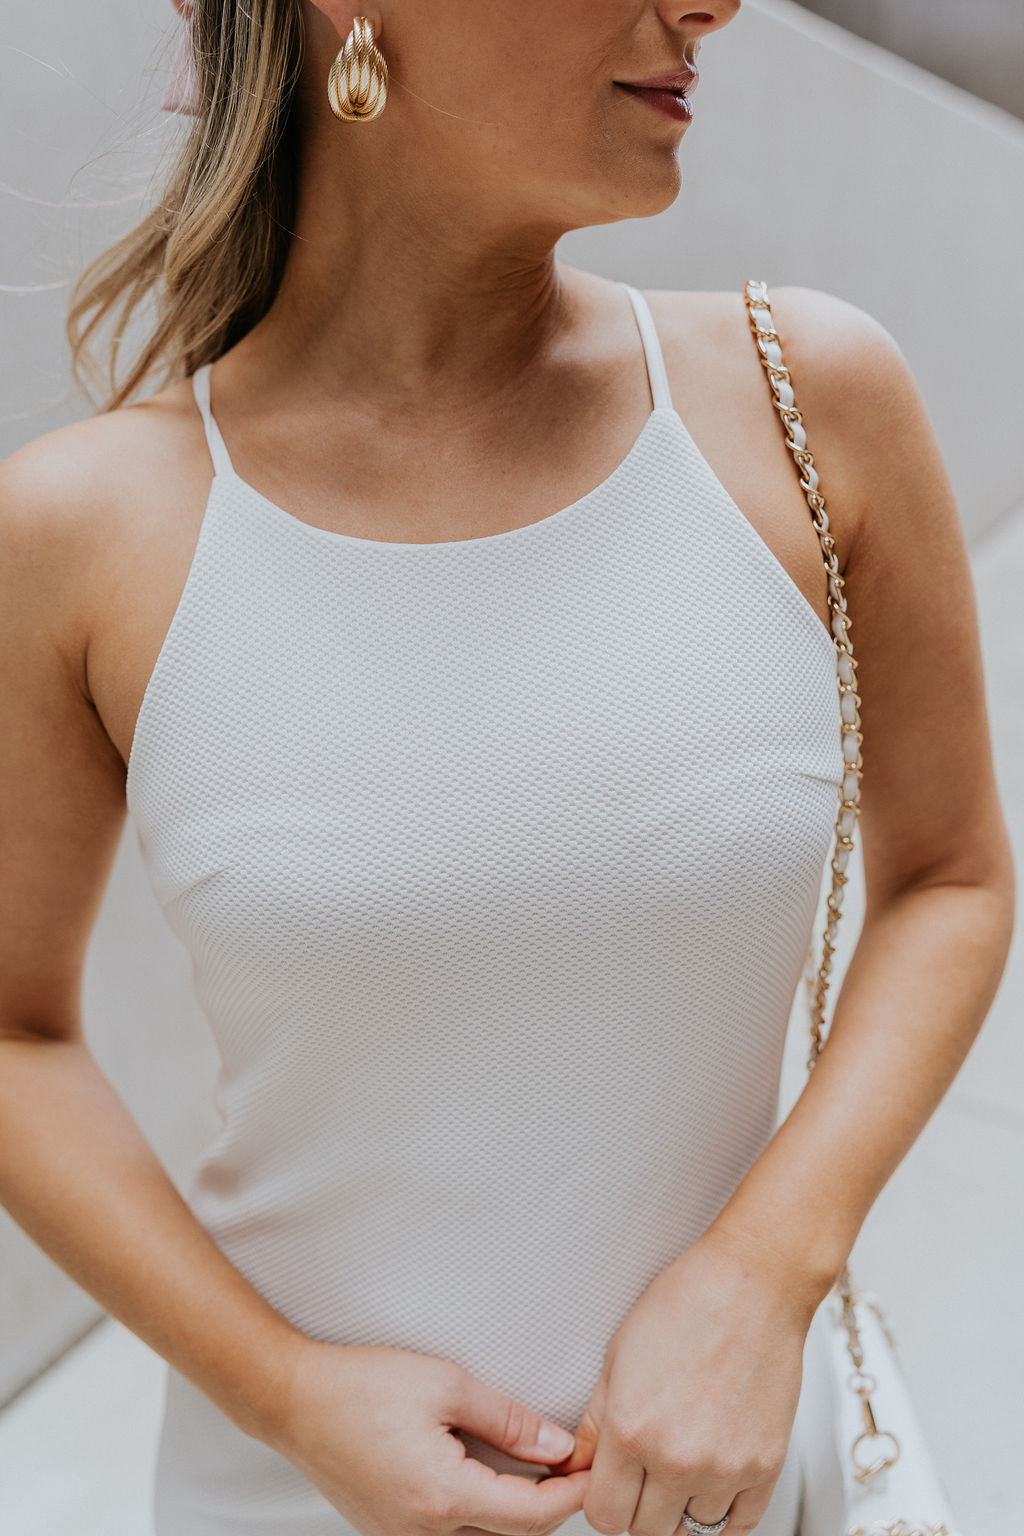 Close up view of female model wearing the Nadia Off White Halter Neckline Mini Dress which features White Textured Fabric, Mini Length, White Lining, Halter Neckline and Monochrome Back Zipper with Hook Closure